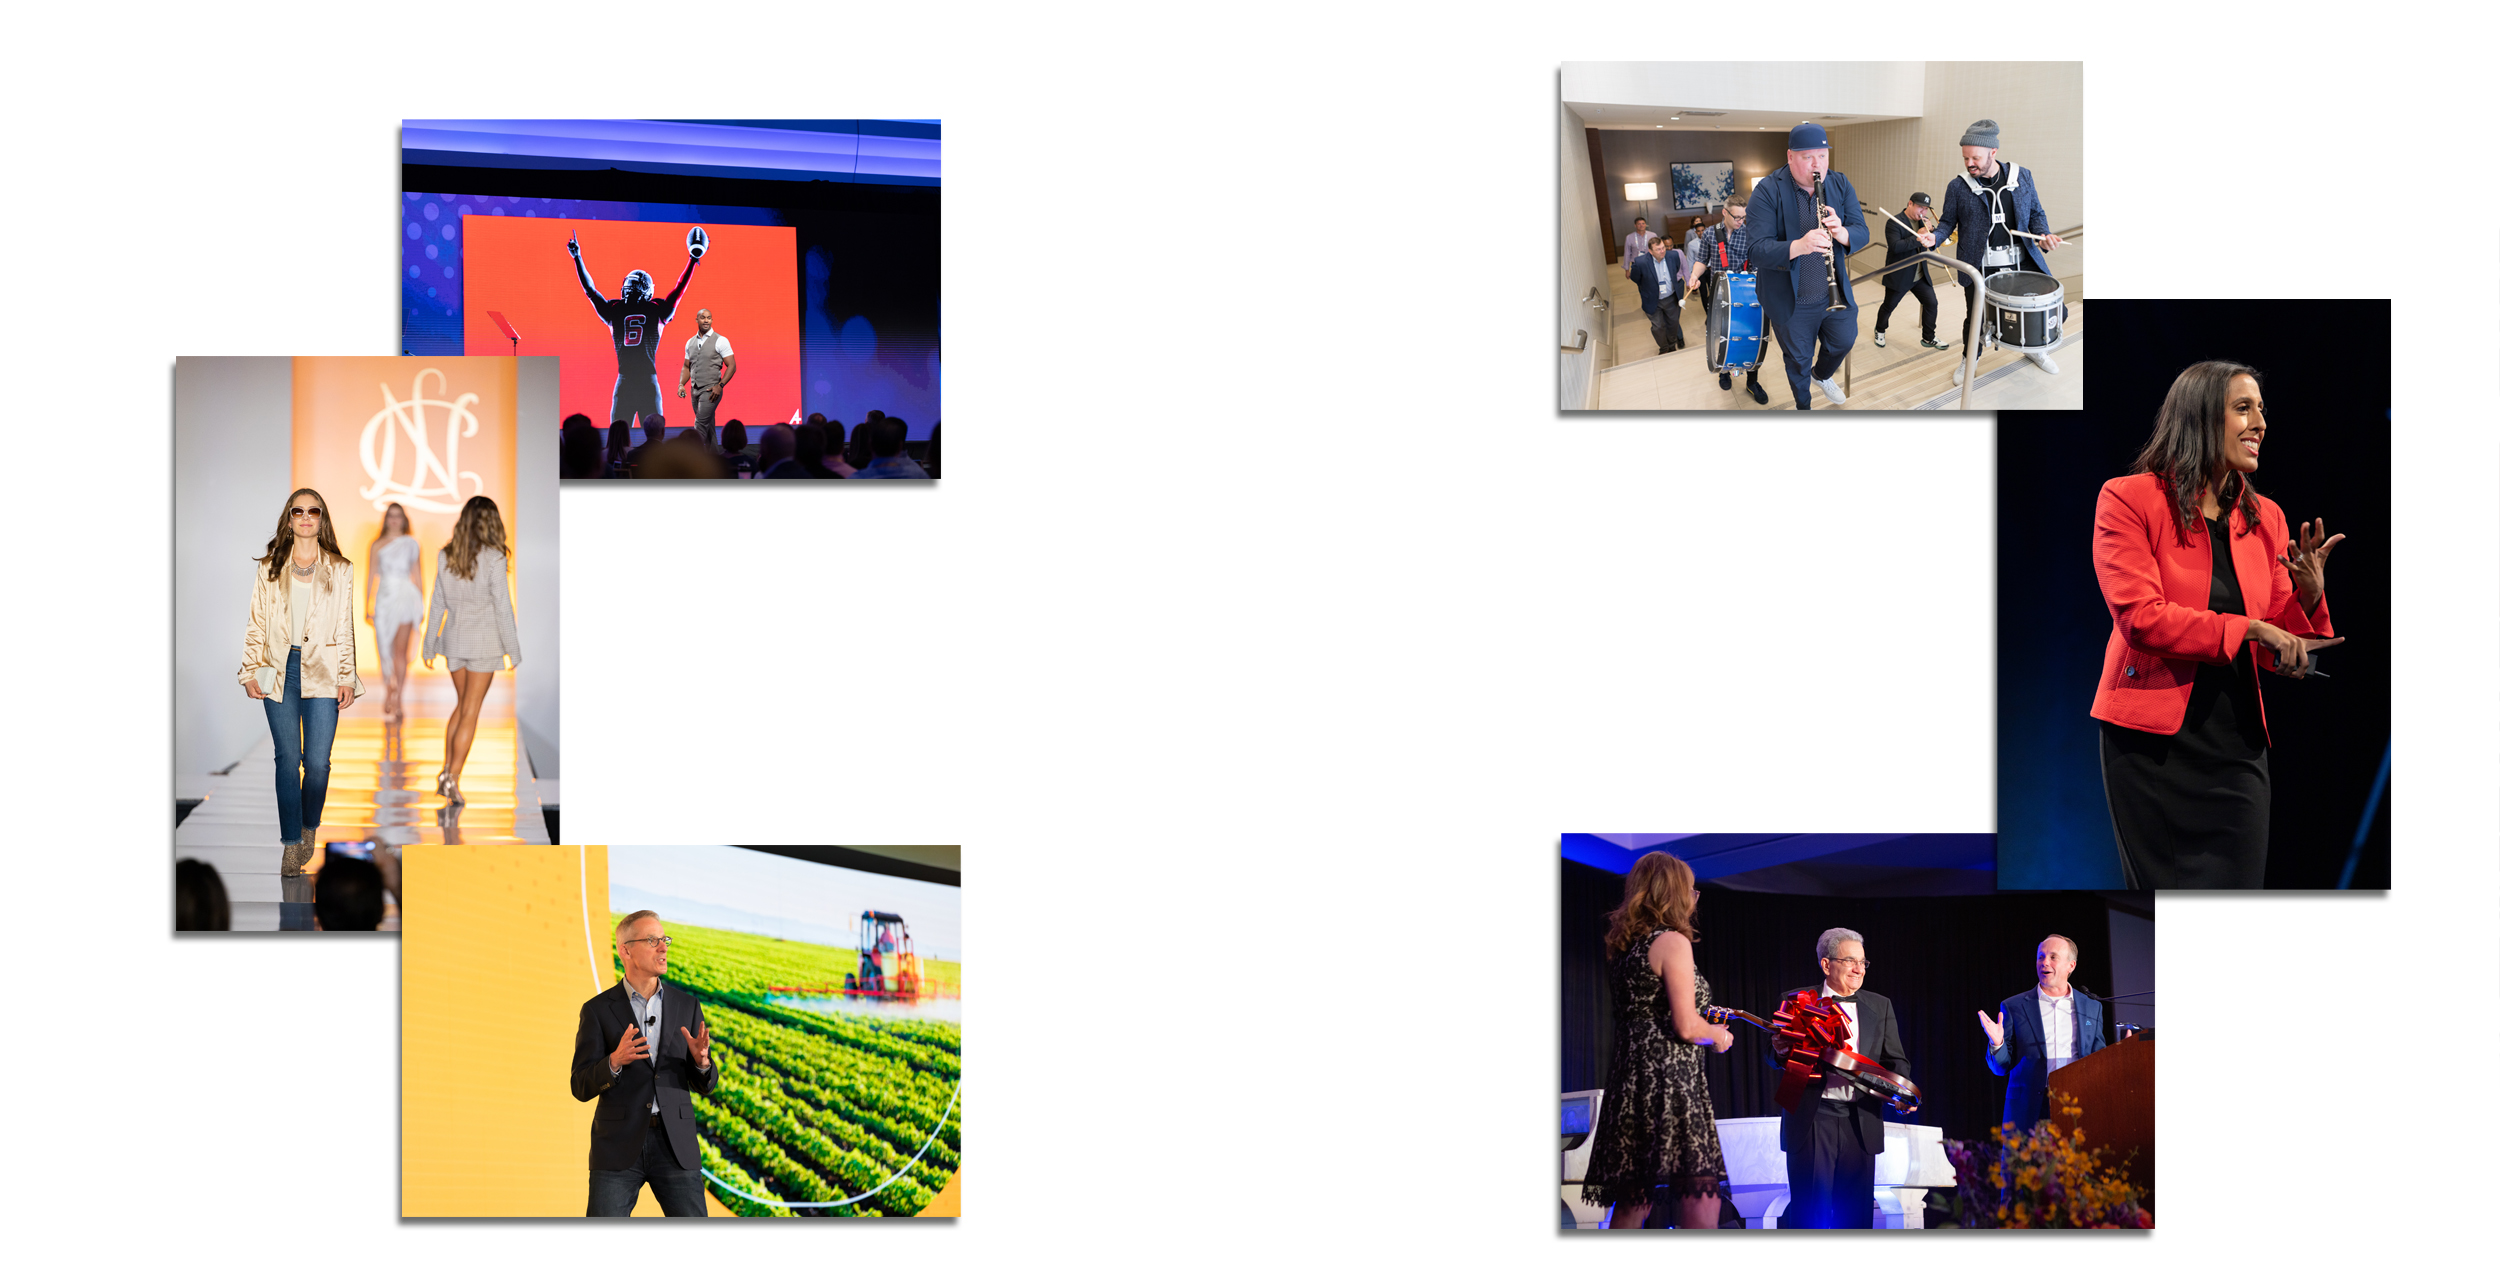 A collage of professional moments, featuring individuals in various settings such as presentations, public speaking, and business engagements.